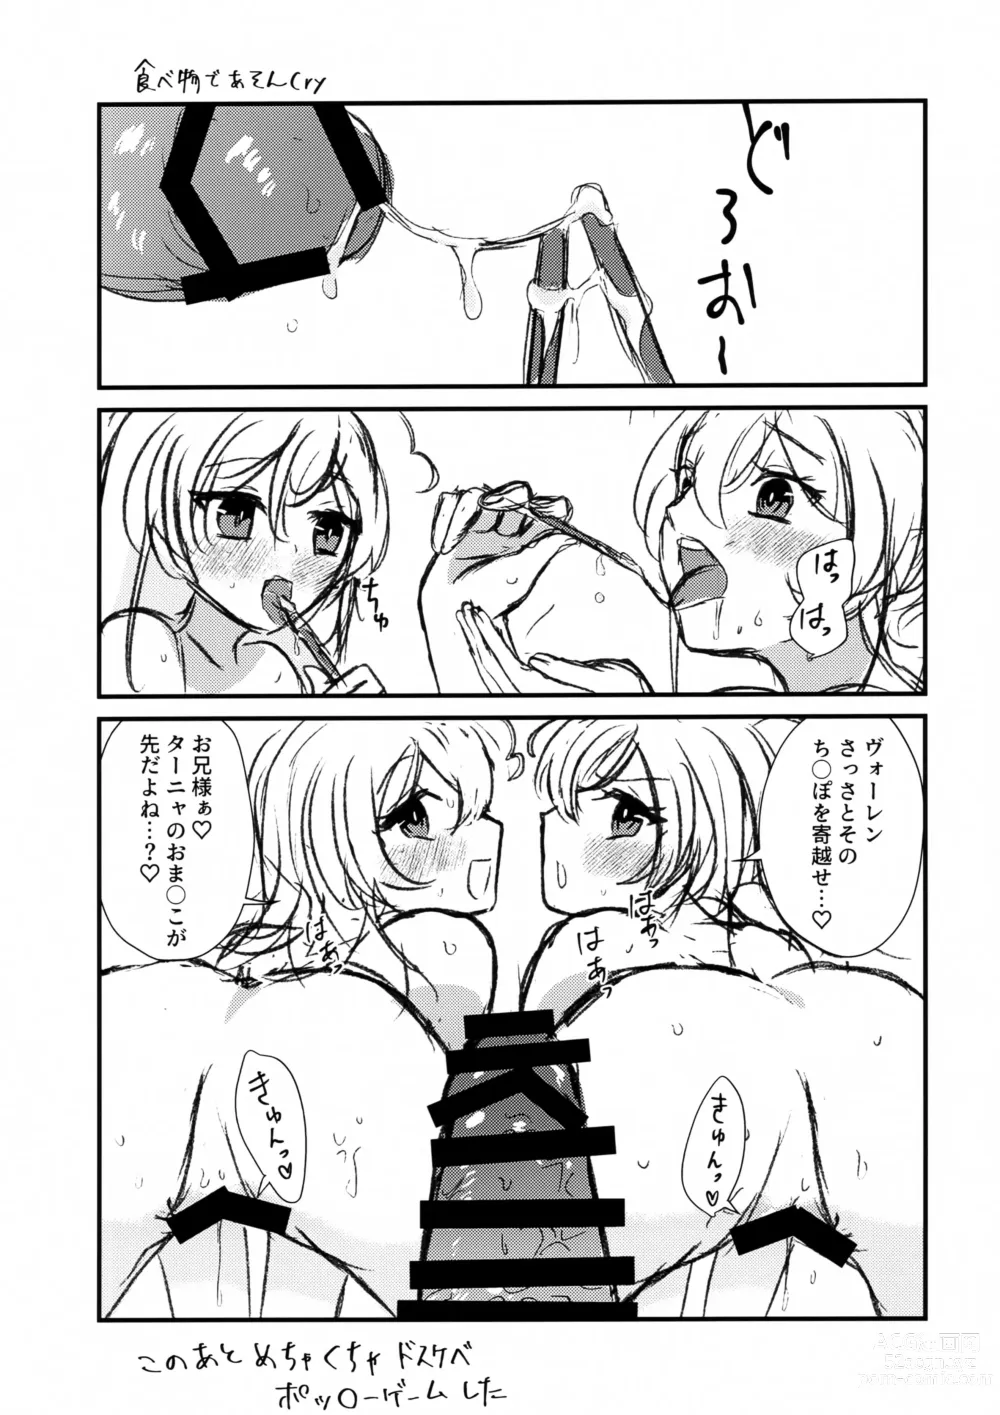 Page 7 of doujinshi W Tanya to Pocky Game